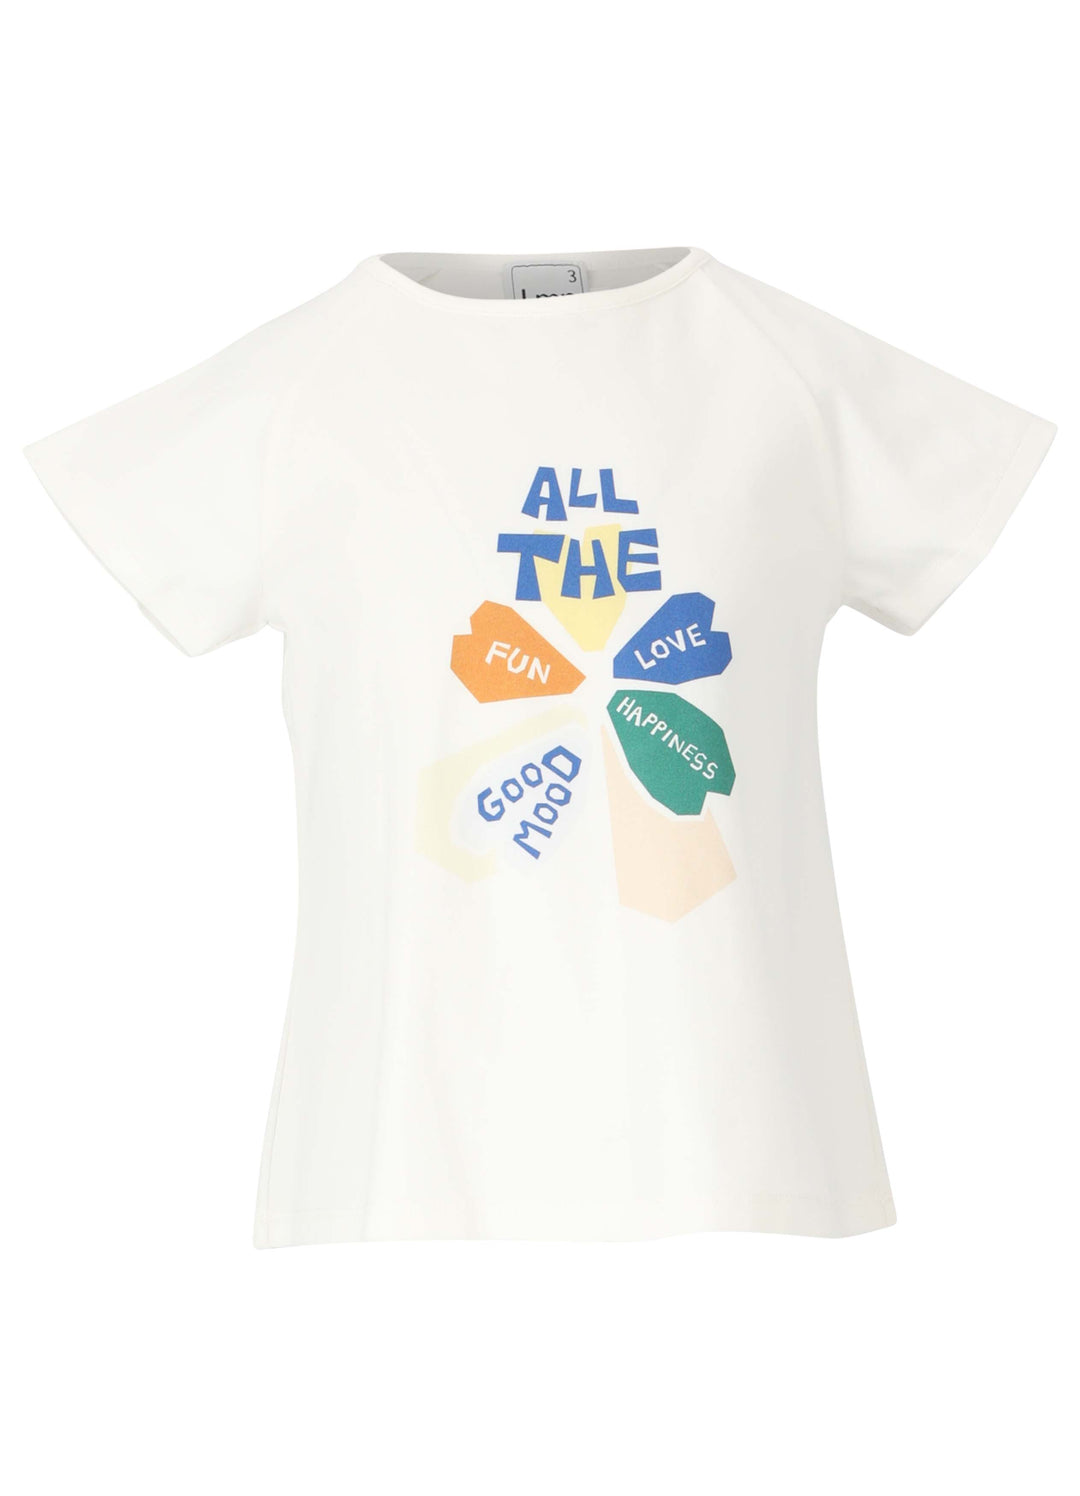 S22-2012-ALL THE PRINT